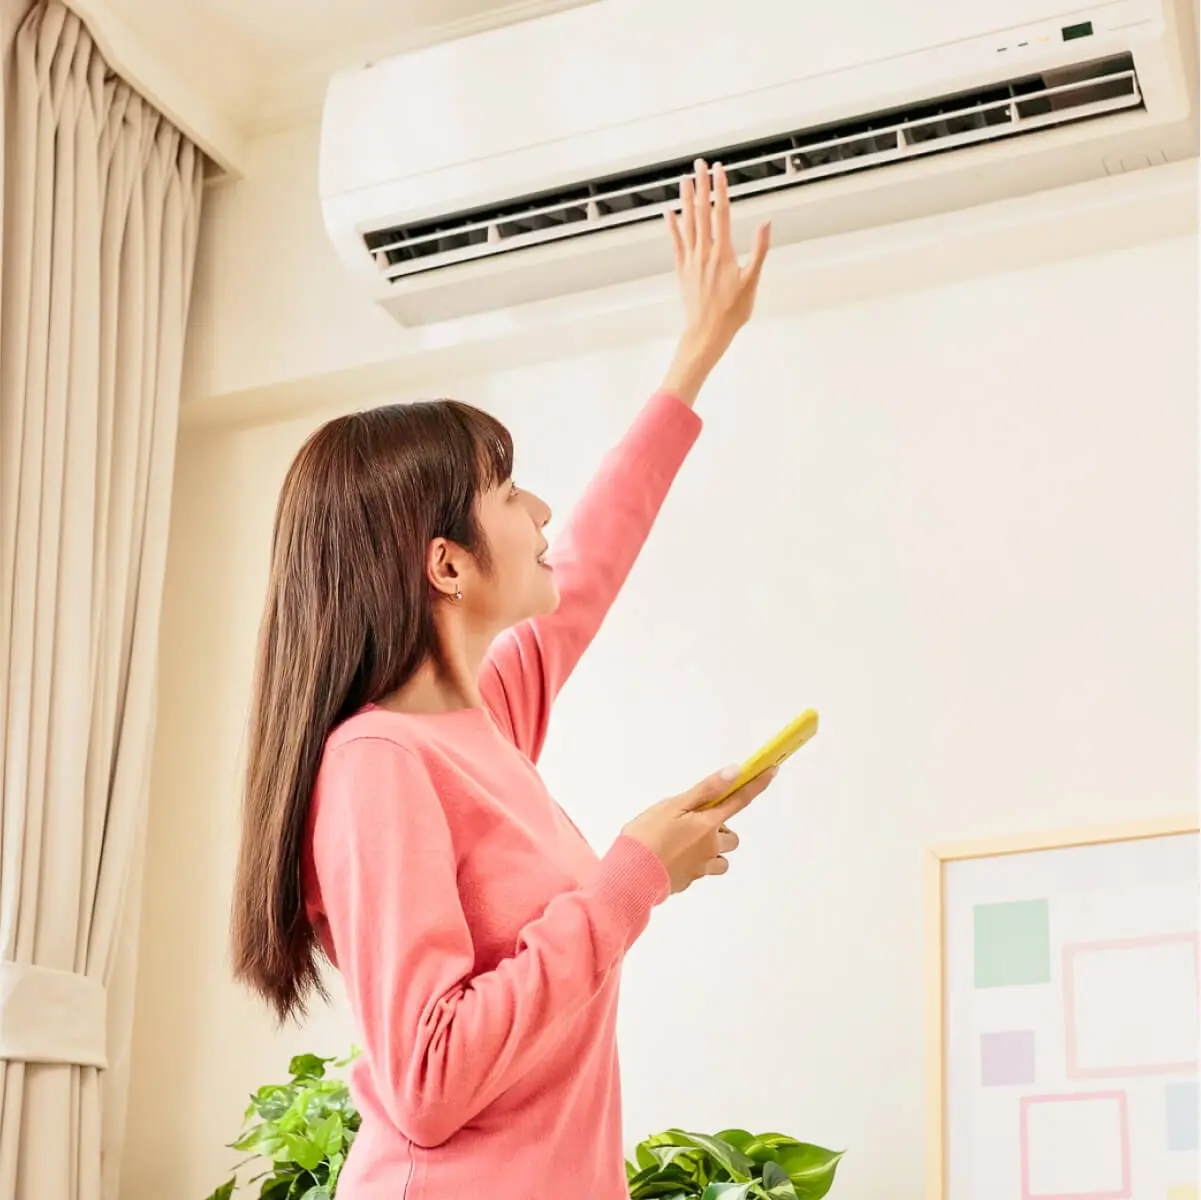 Woman in pink long sleeve top reaches up towards her air conditioner with remote in hand, to check if it's turned on.